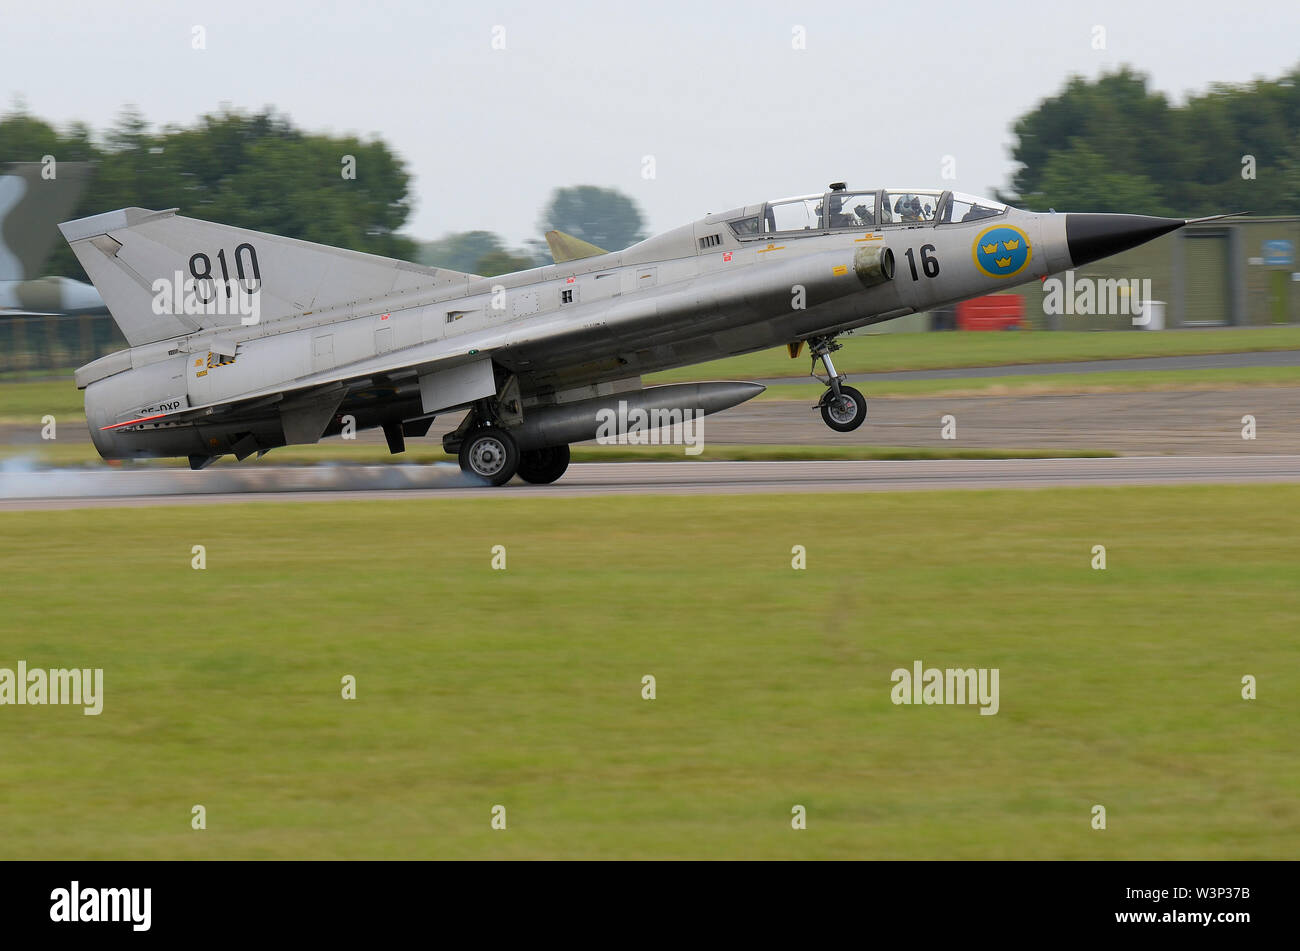 Saab 35 Draken Swedish single-engine fighter aircraft. Jet plane. Swedish Air Force Historic Flight operated preserved 1950s classic jet Touching down Stock Photo